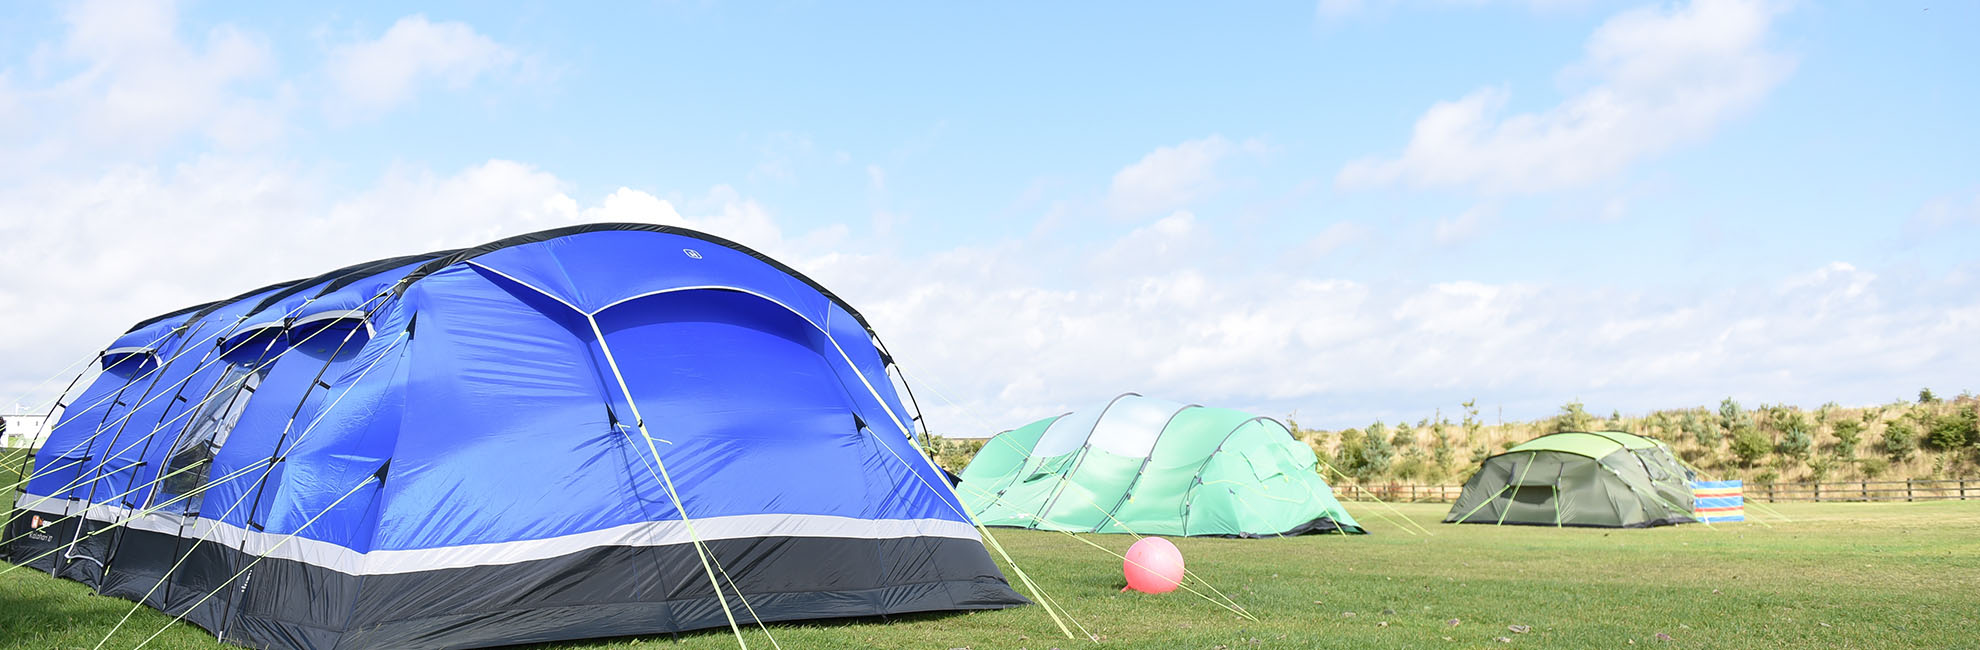 Tents pitched up on the grass